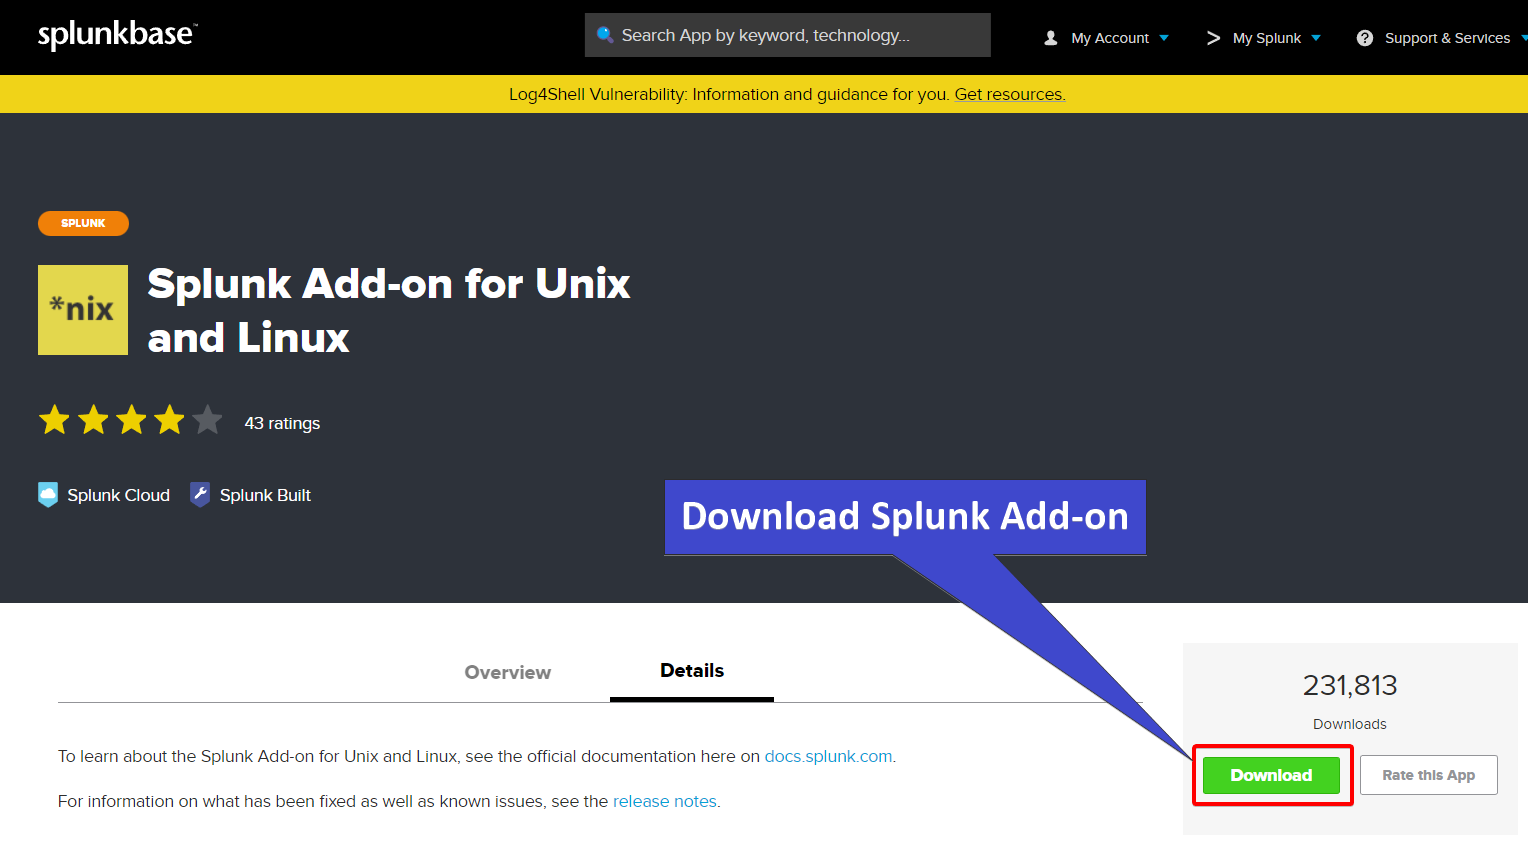 Downloading the Splunk Add-on for Unix and Linux